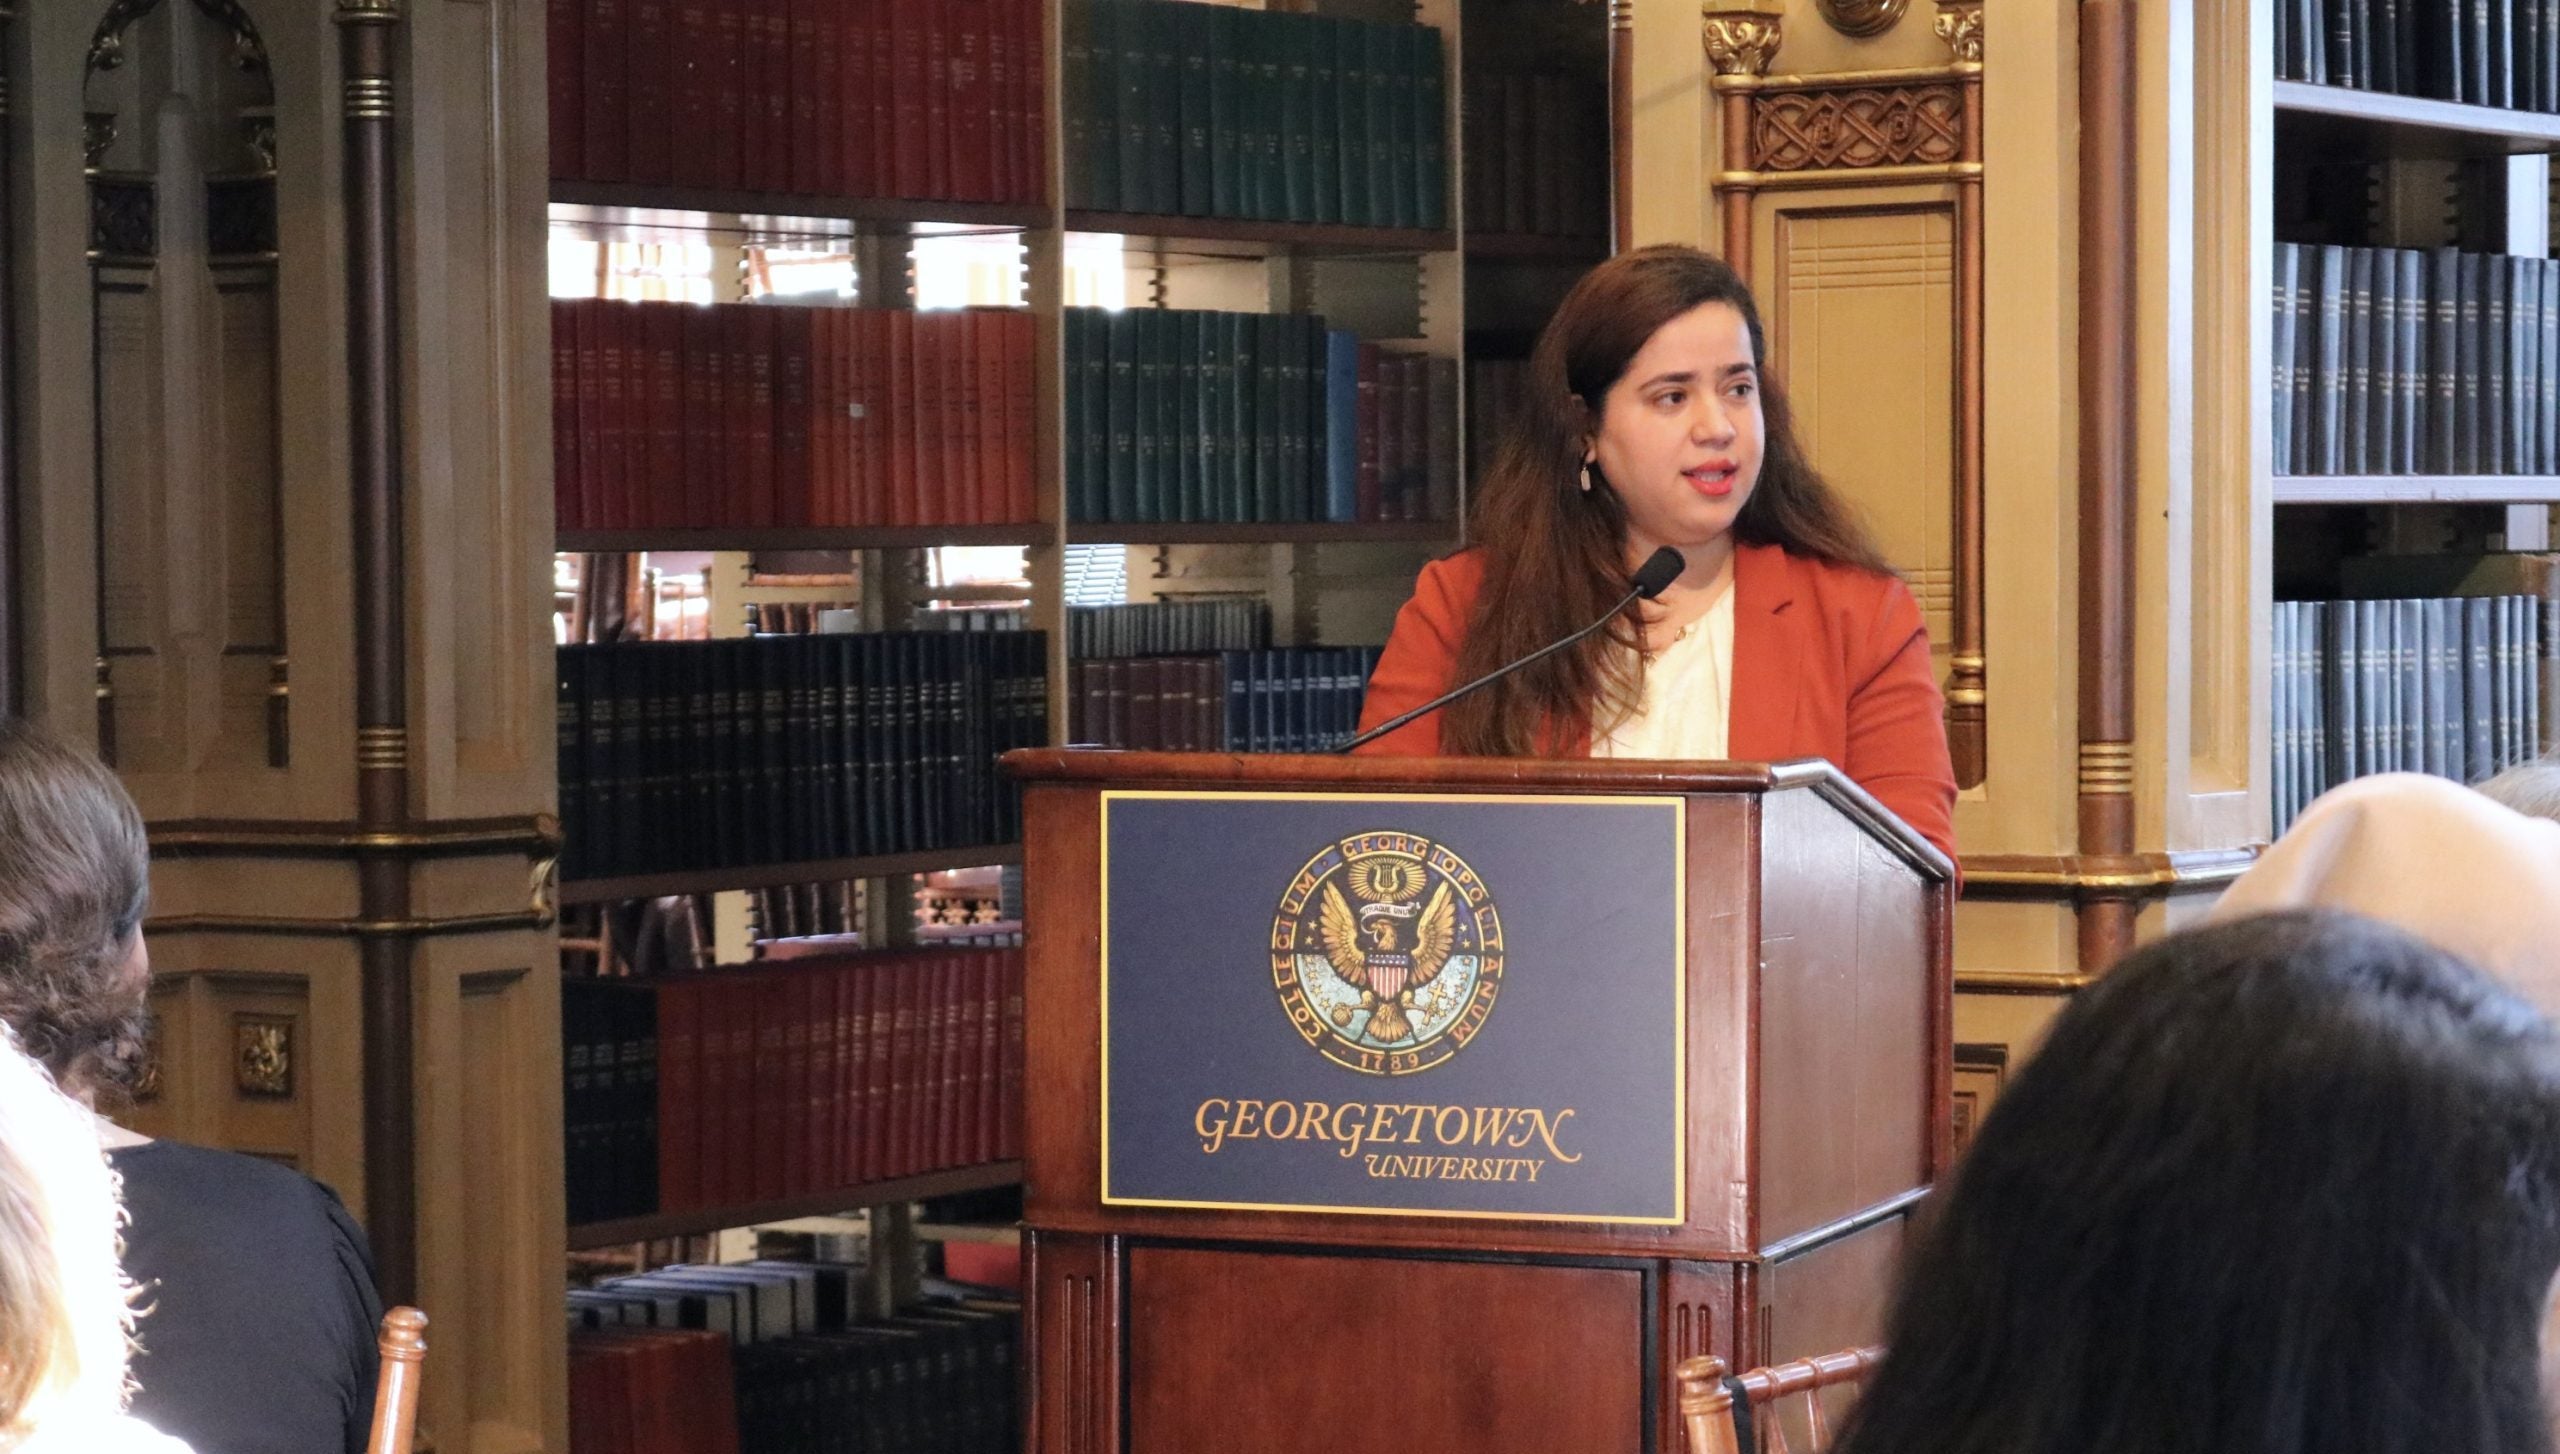 An Afghan woman in an orange blazer speaks behind a podium in a library.